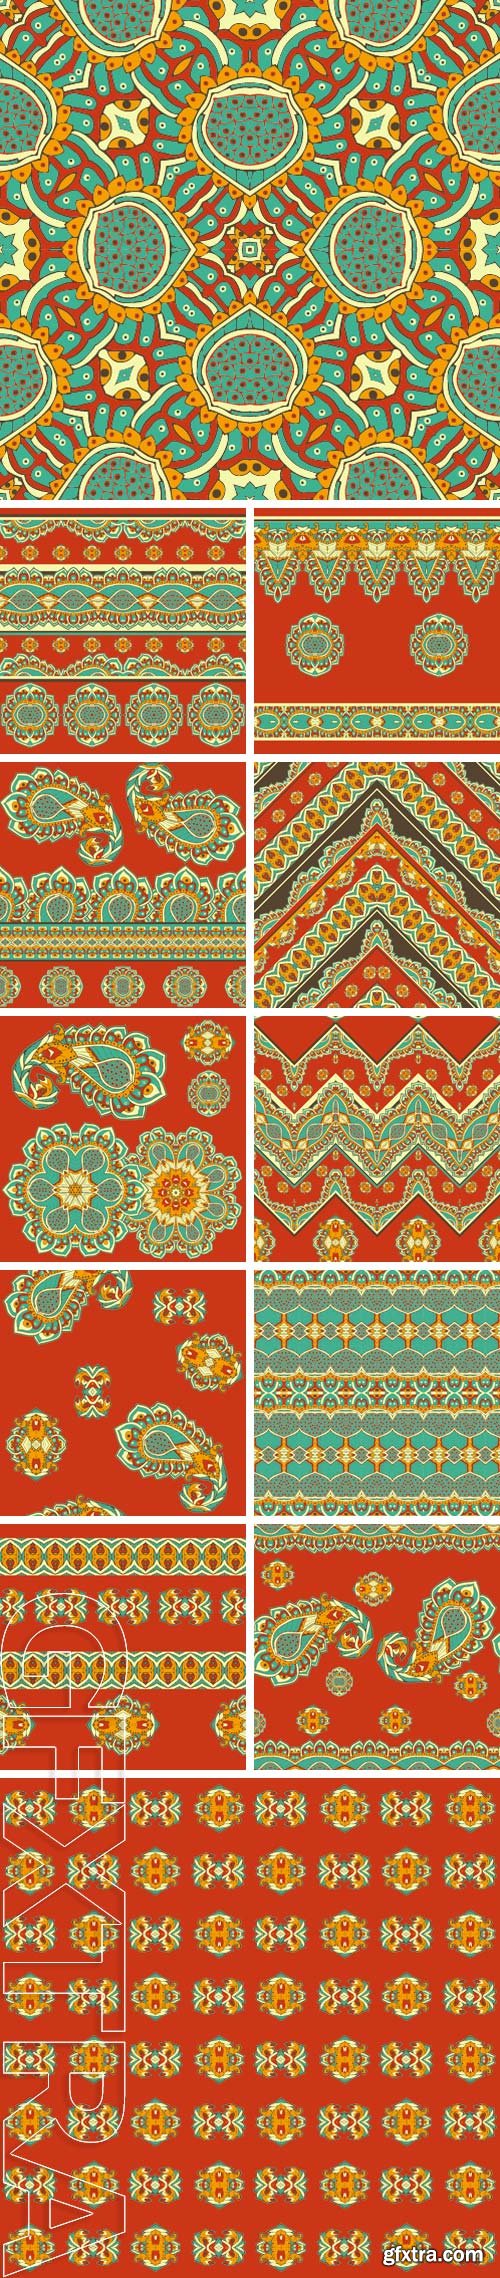 Stock Vectors - Seamless pattern based on traditional Asian elements Paisley